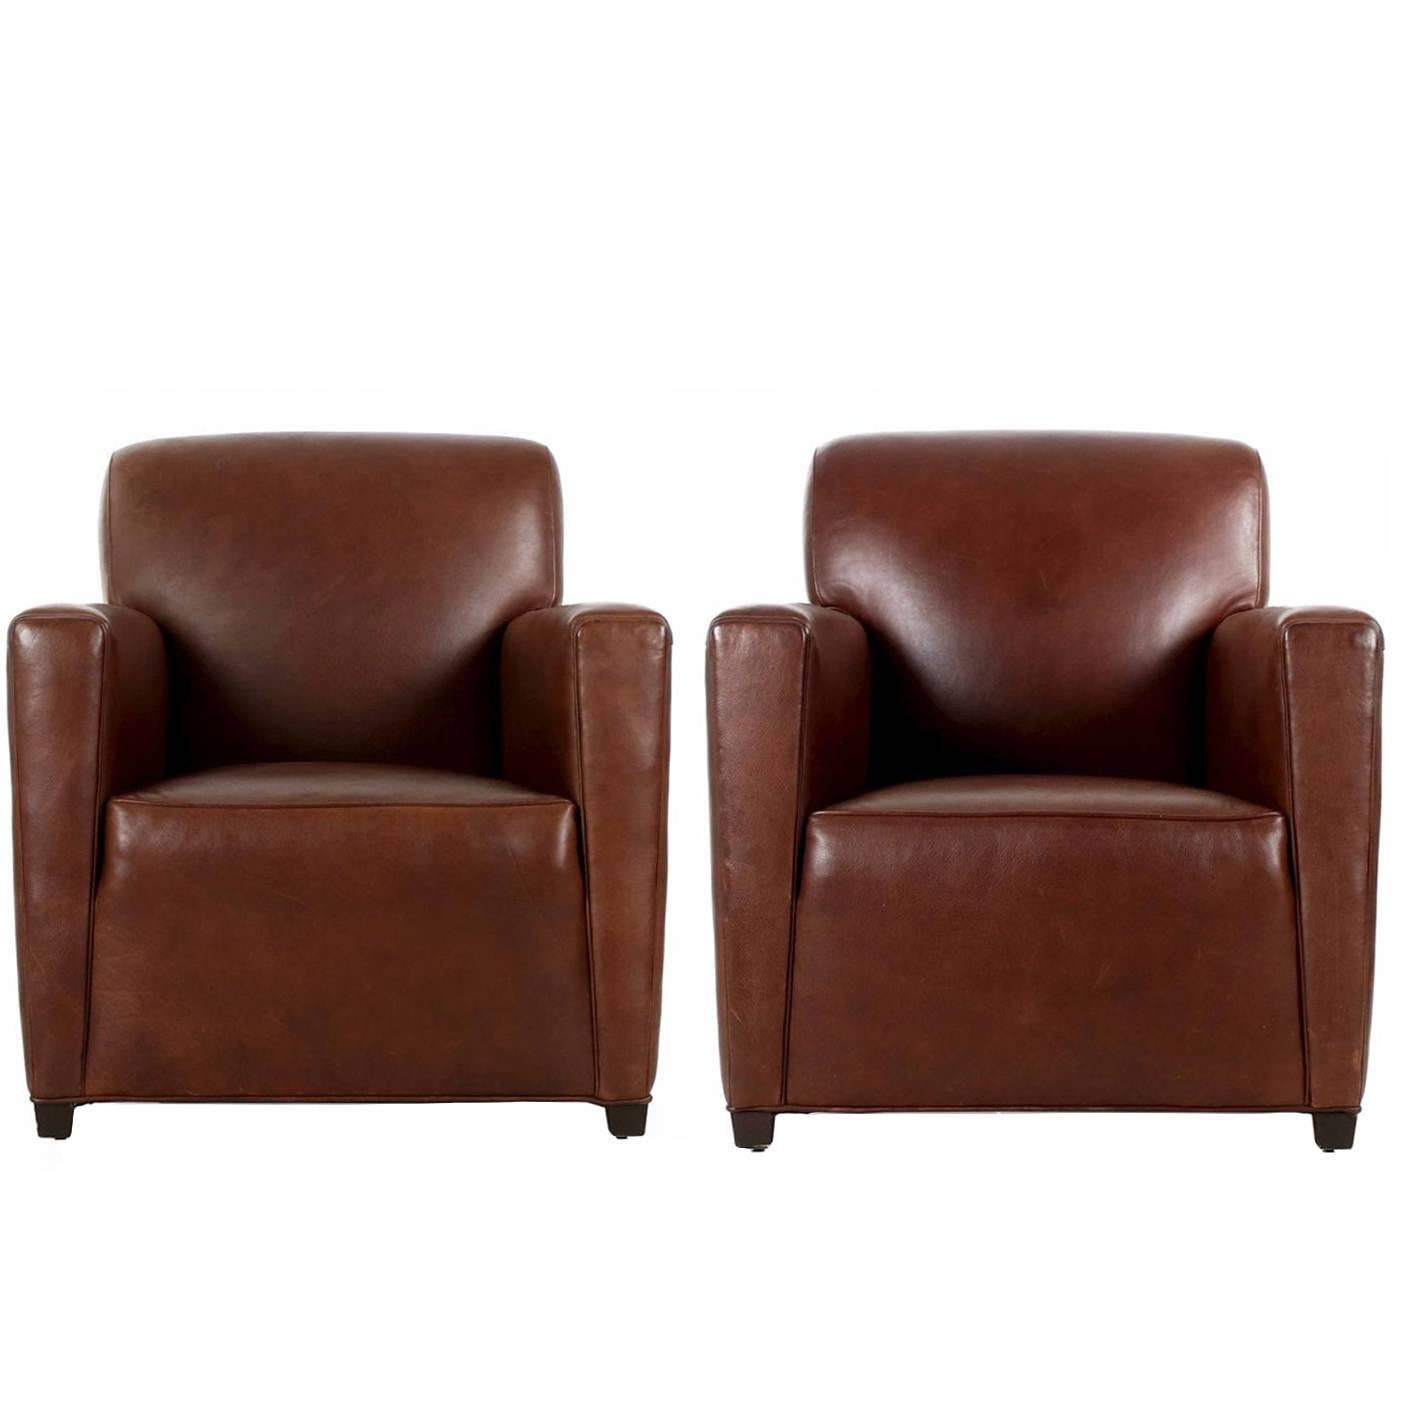 Pair of Coach Inc. Brown Leather Club Chairs in the Art Deco Taste